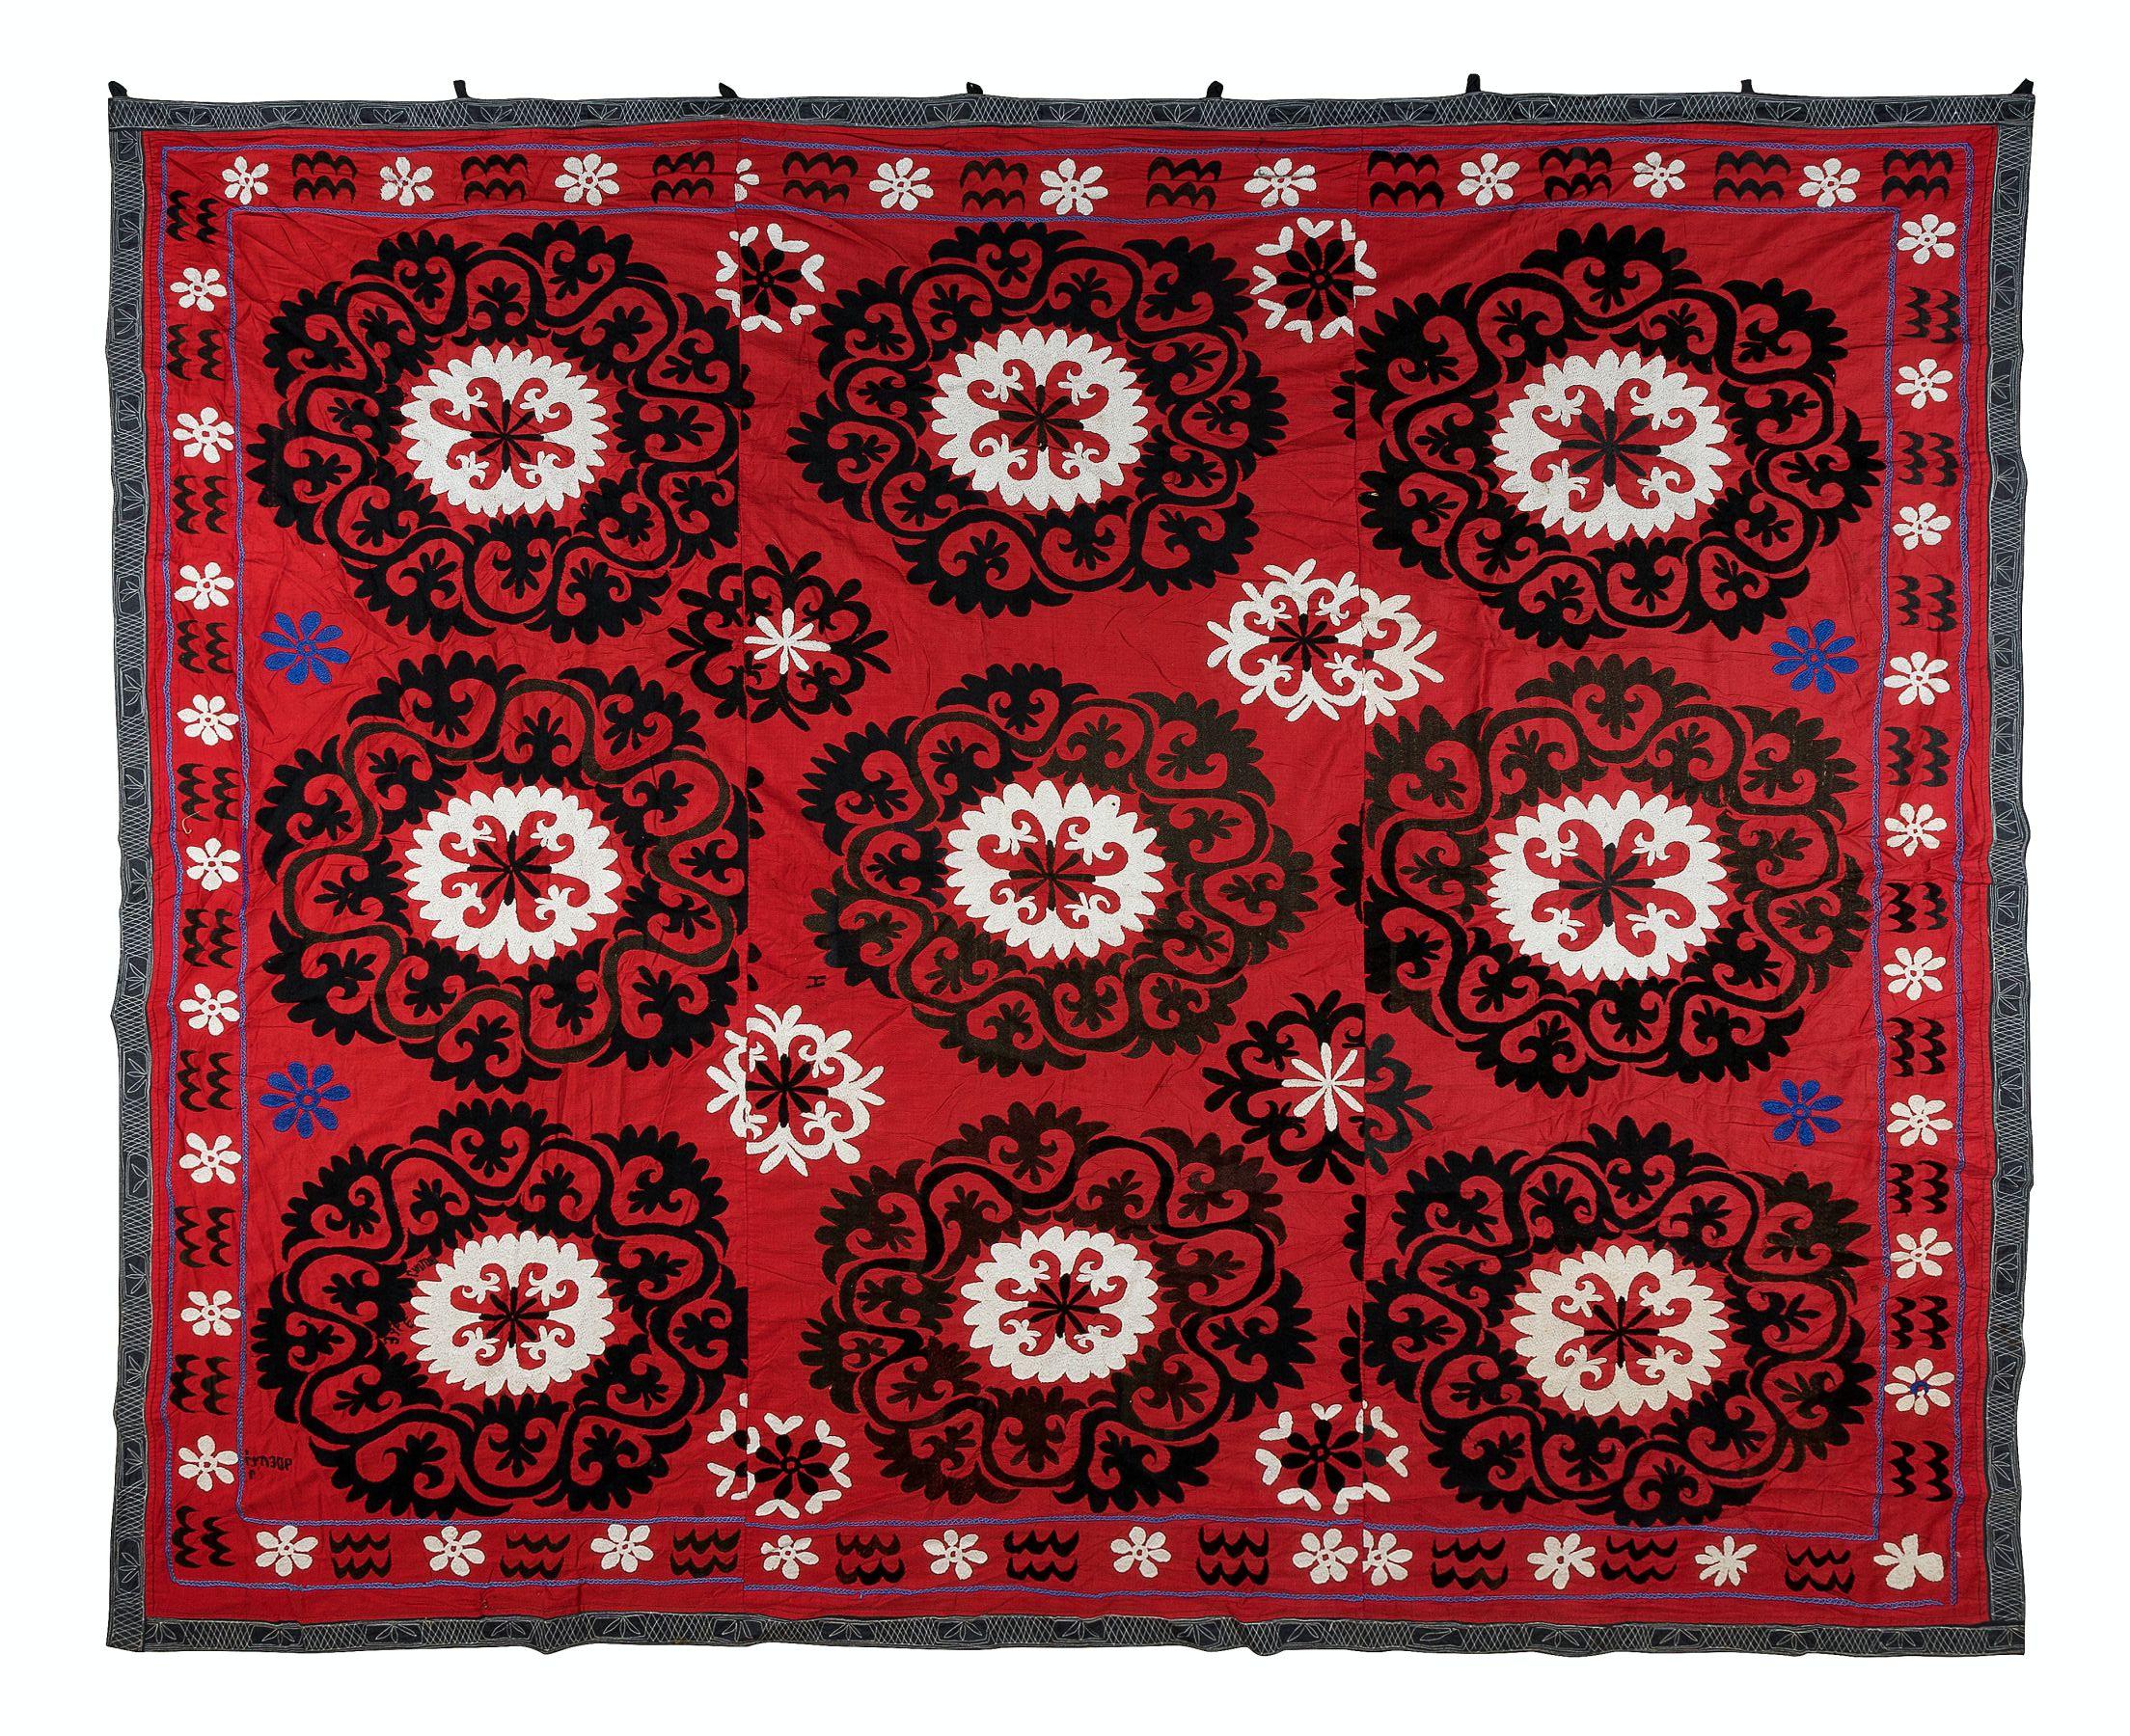 20th Century Vintage Silk Embroidery Bed Cover, Uzbek Suzani Wall Hanging in Red For Sale